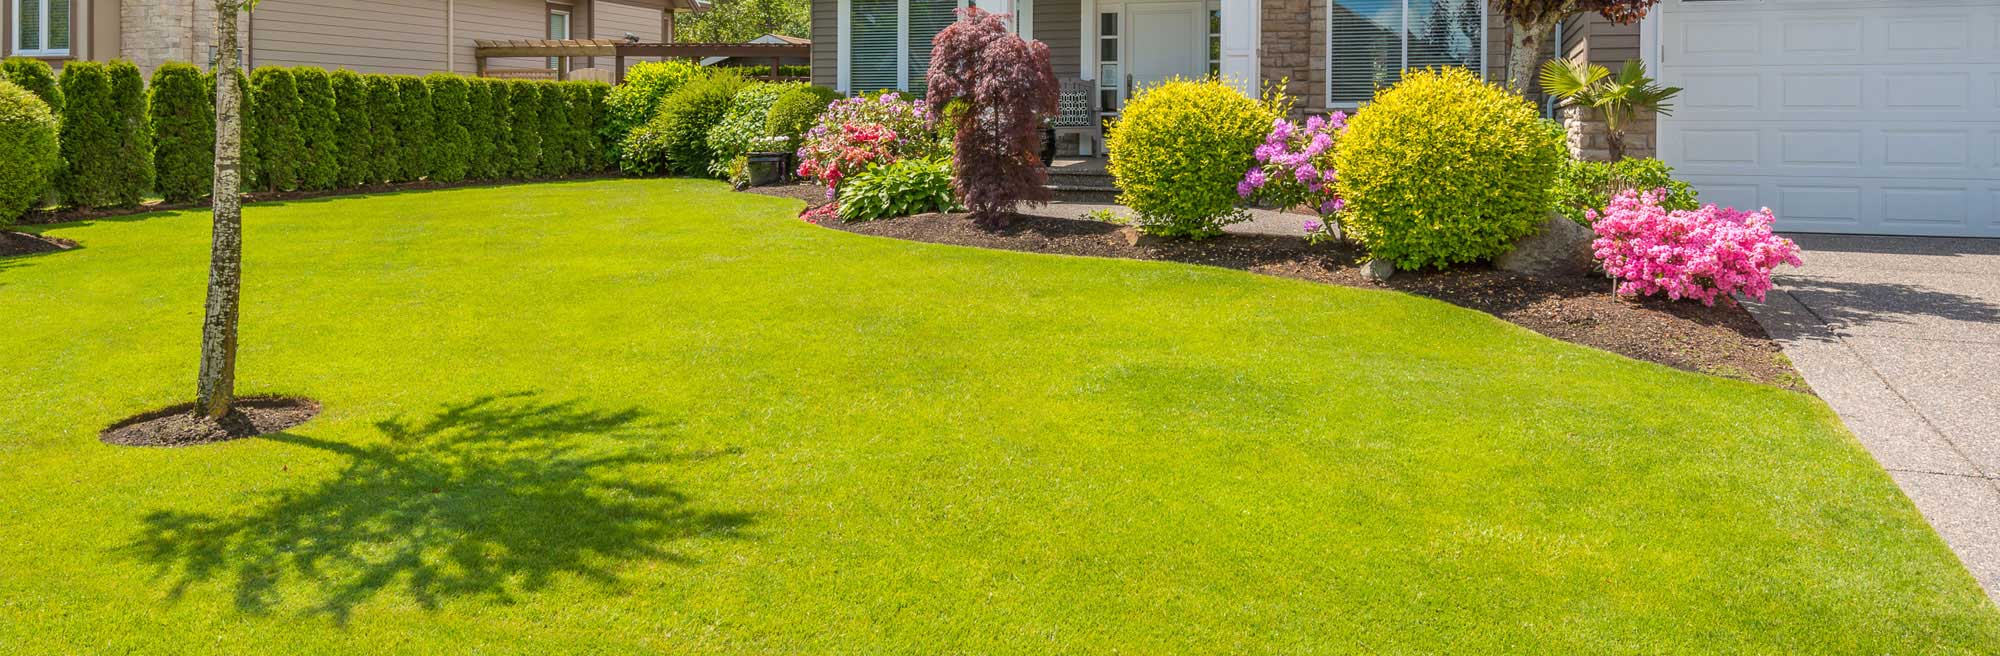 Bright grass in front of a house with different colored bushes